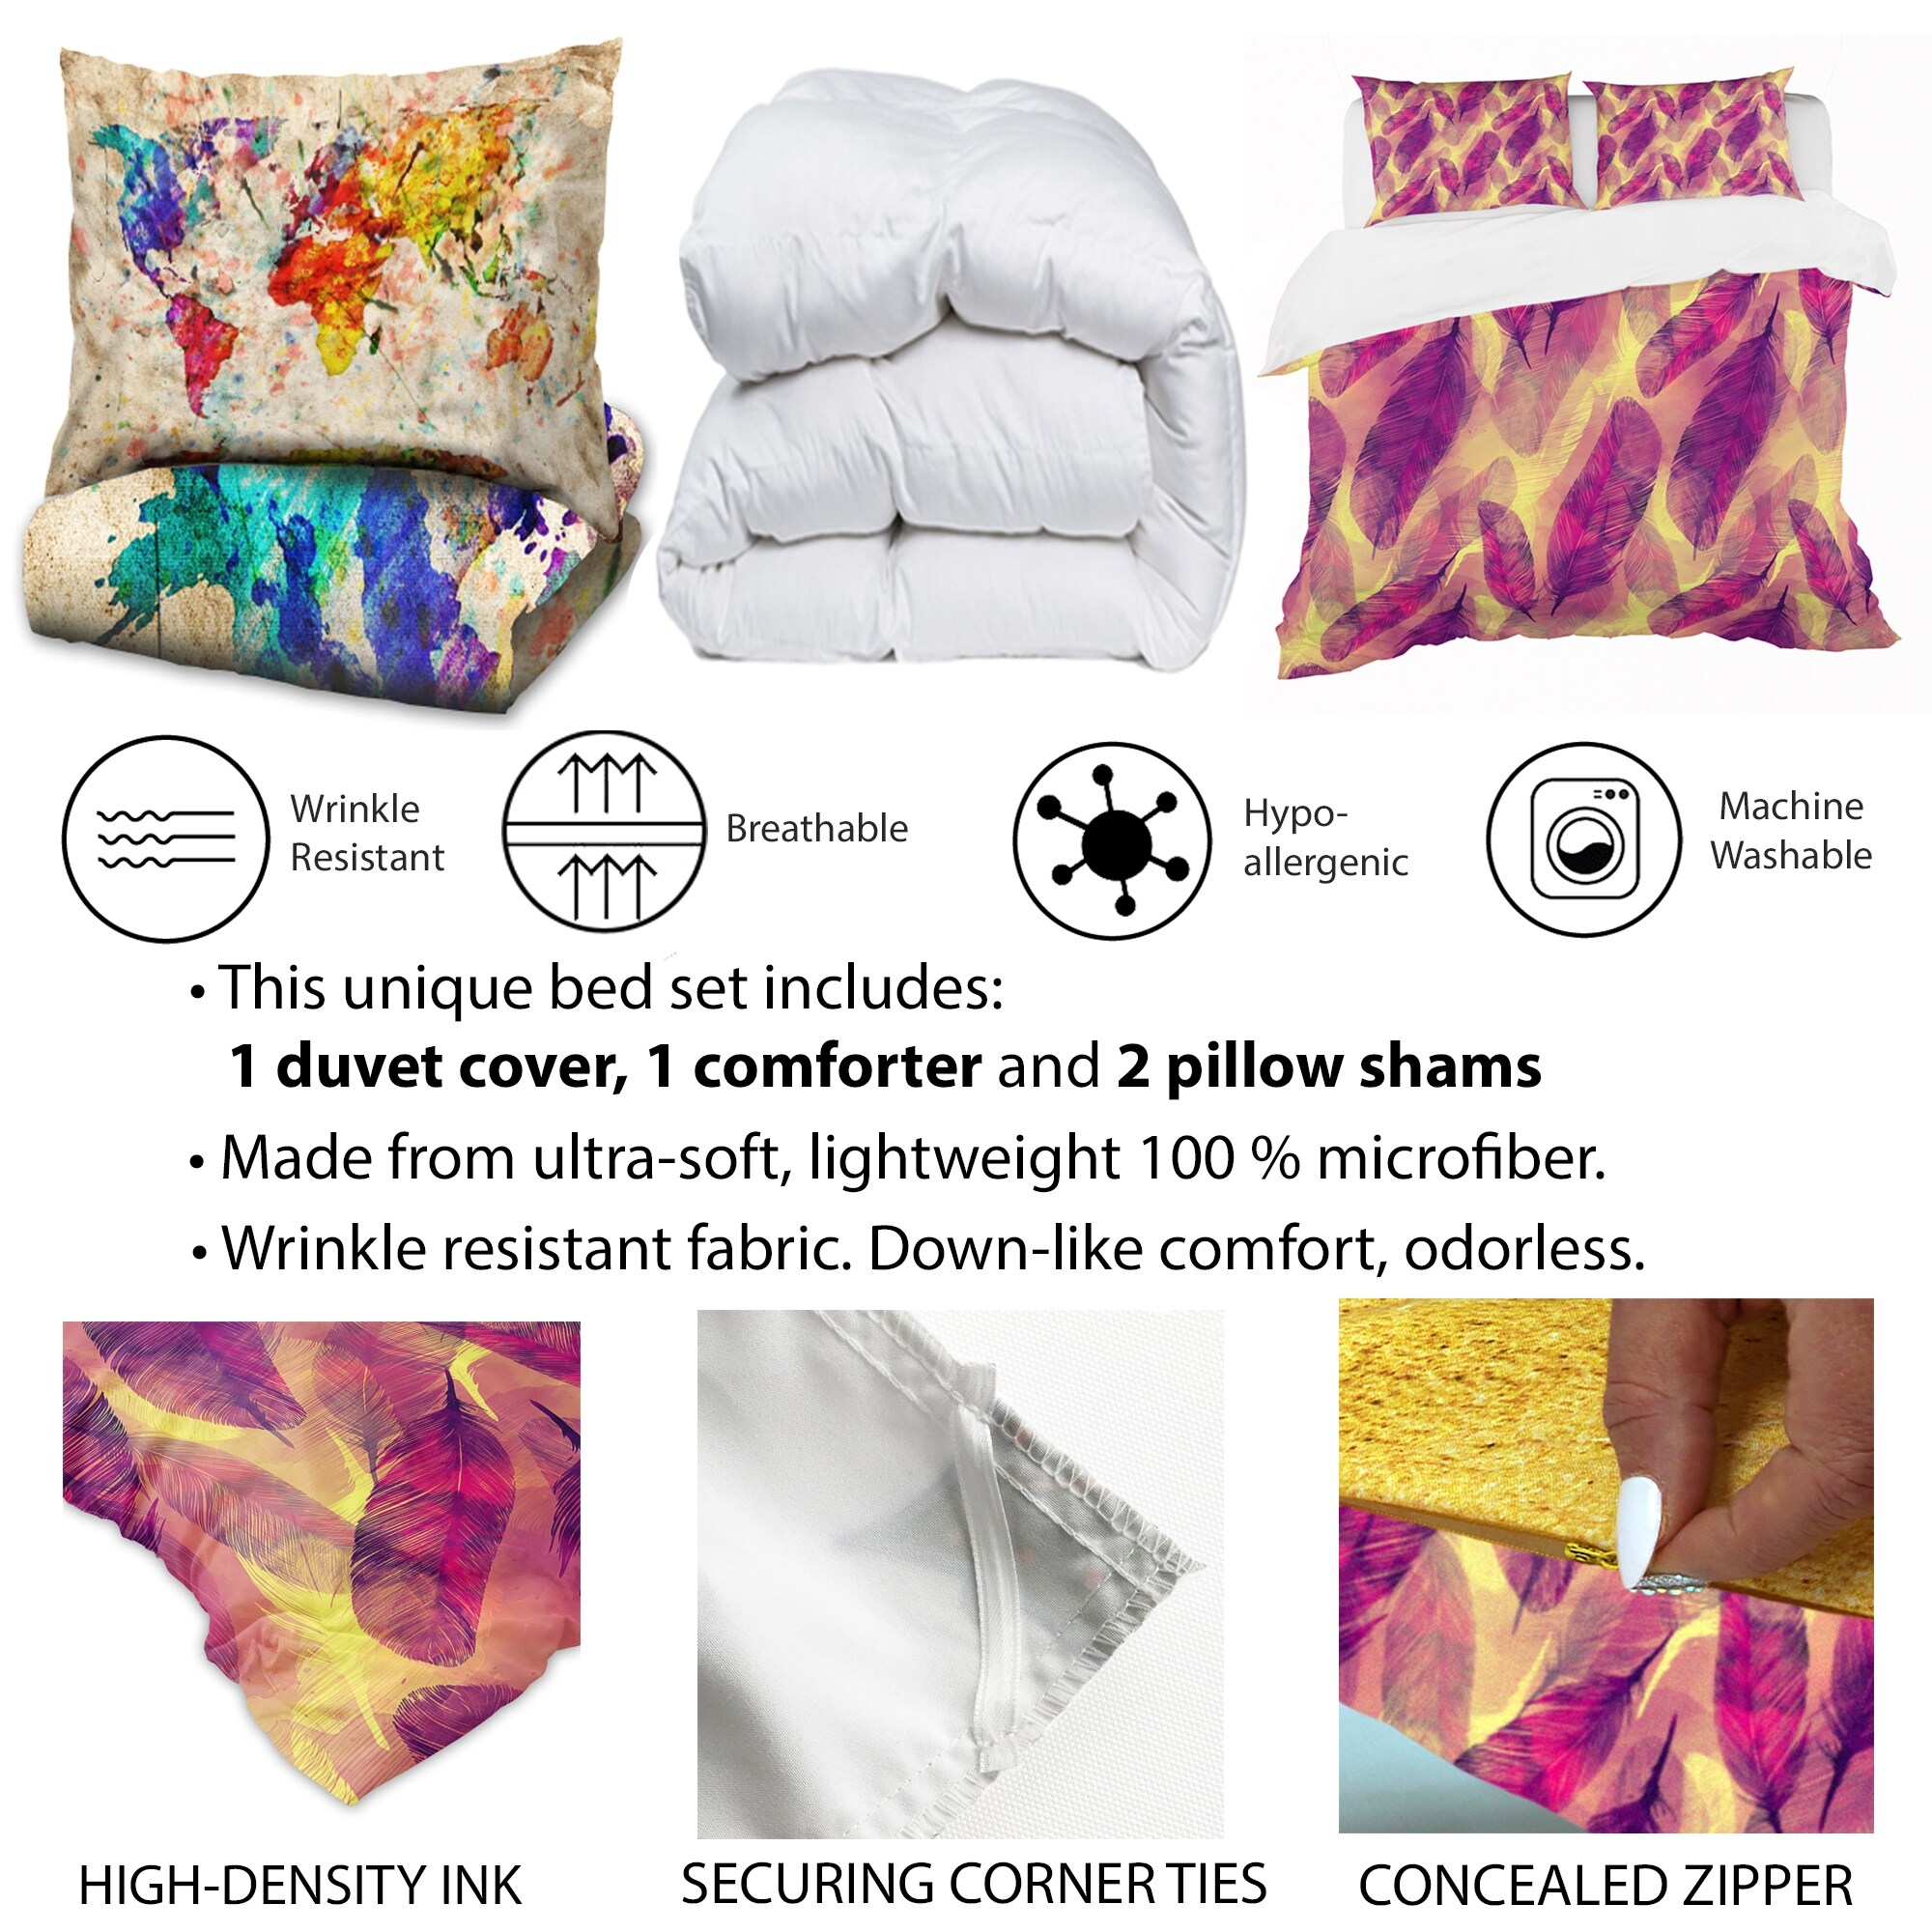 Designart 'Colorful Boho Feathers In Circle' Bohemian & Eclectic Duvet Cover Comforter Set